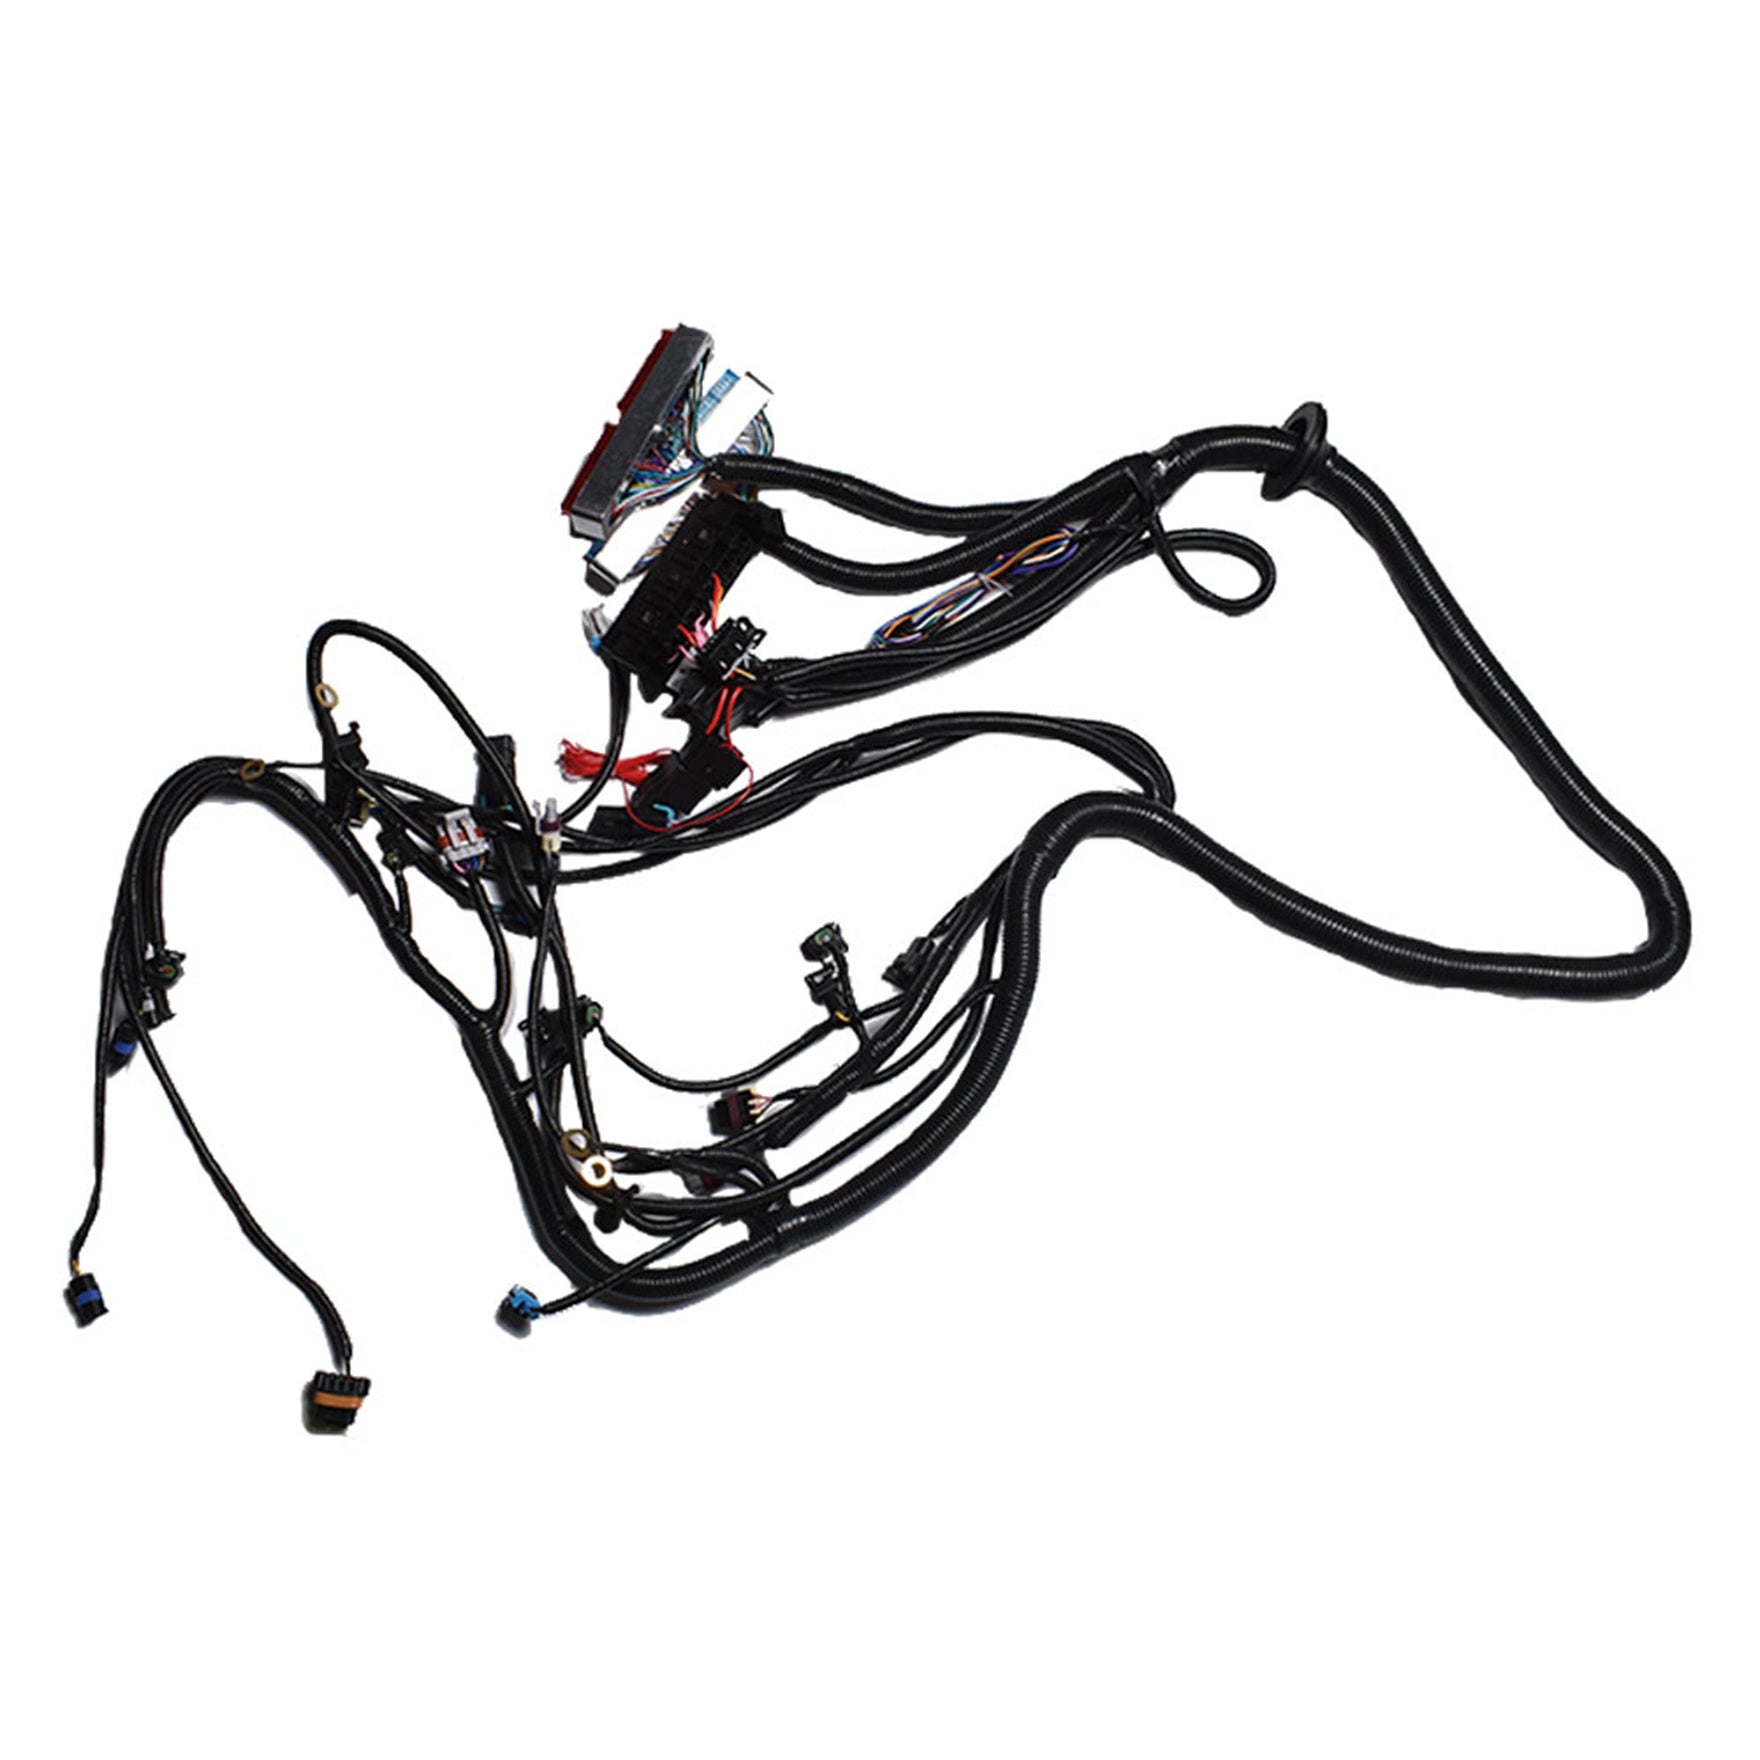 Wiring Harness T56 For 98-05 DBC LS1 or Non-Electric Tran 4.8 5.3 6.0L